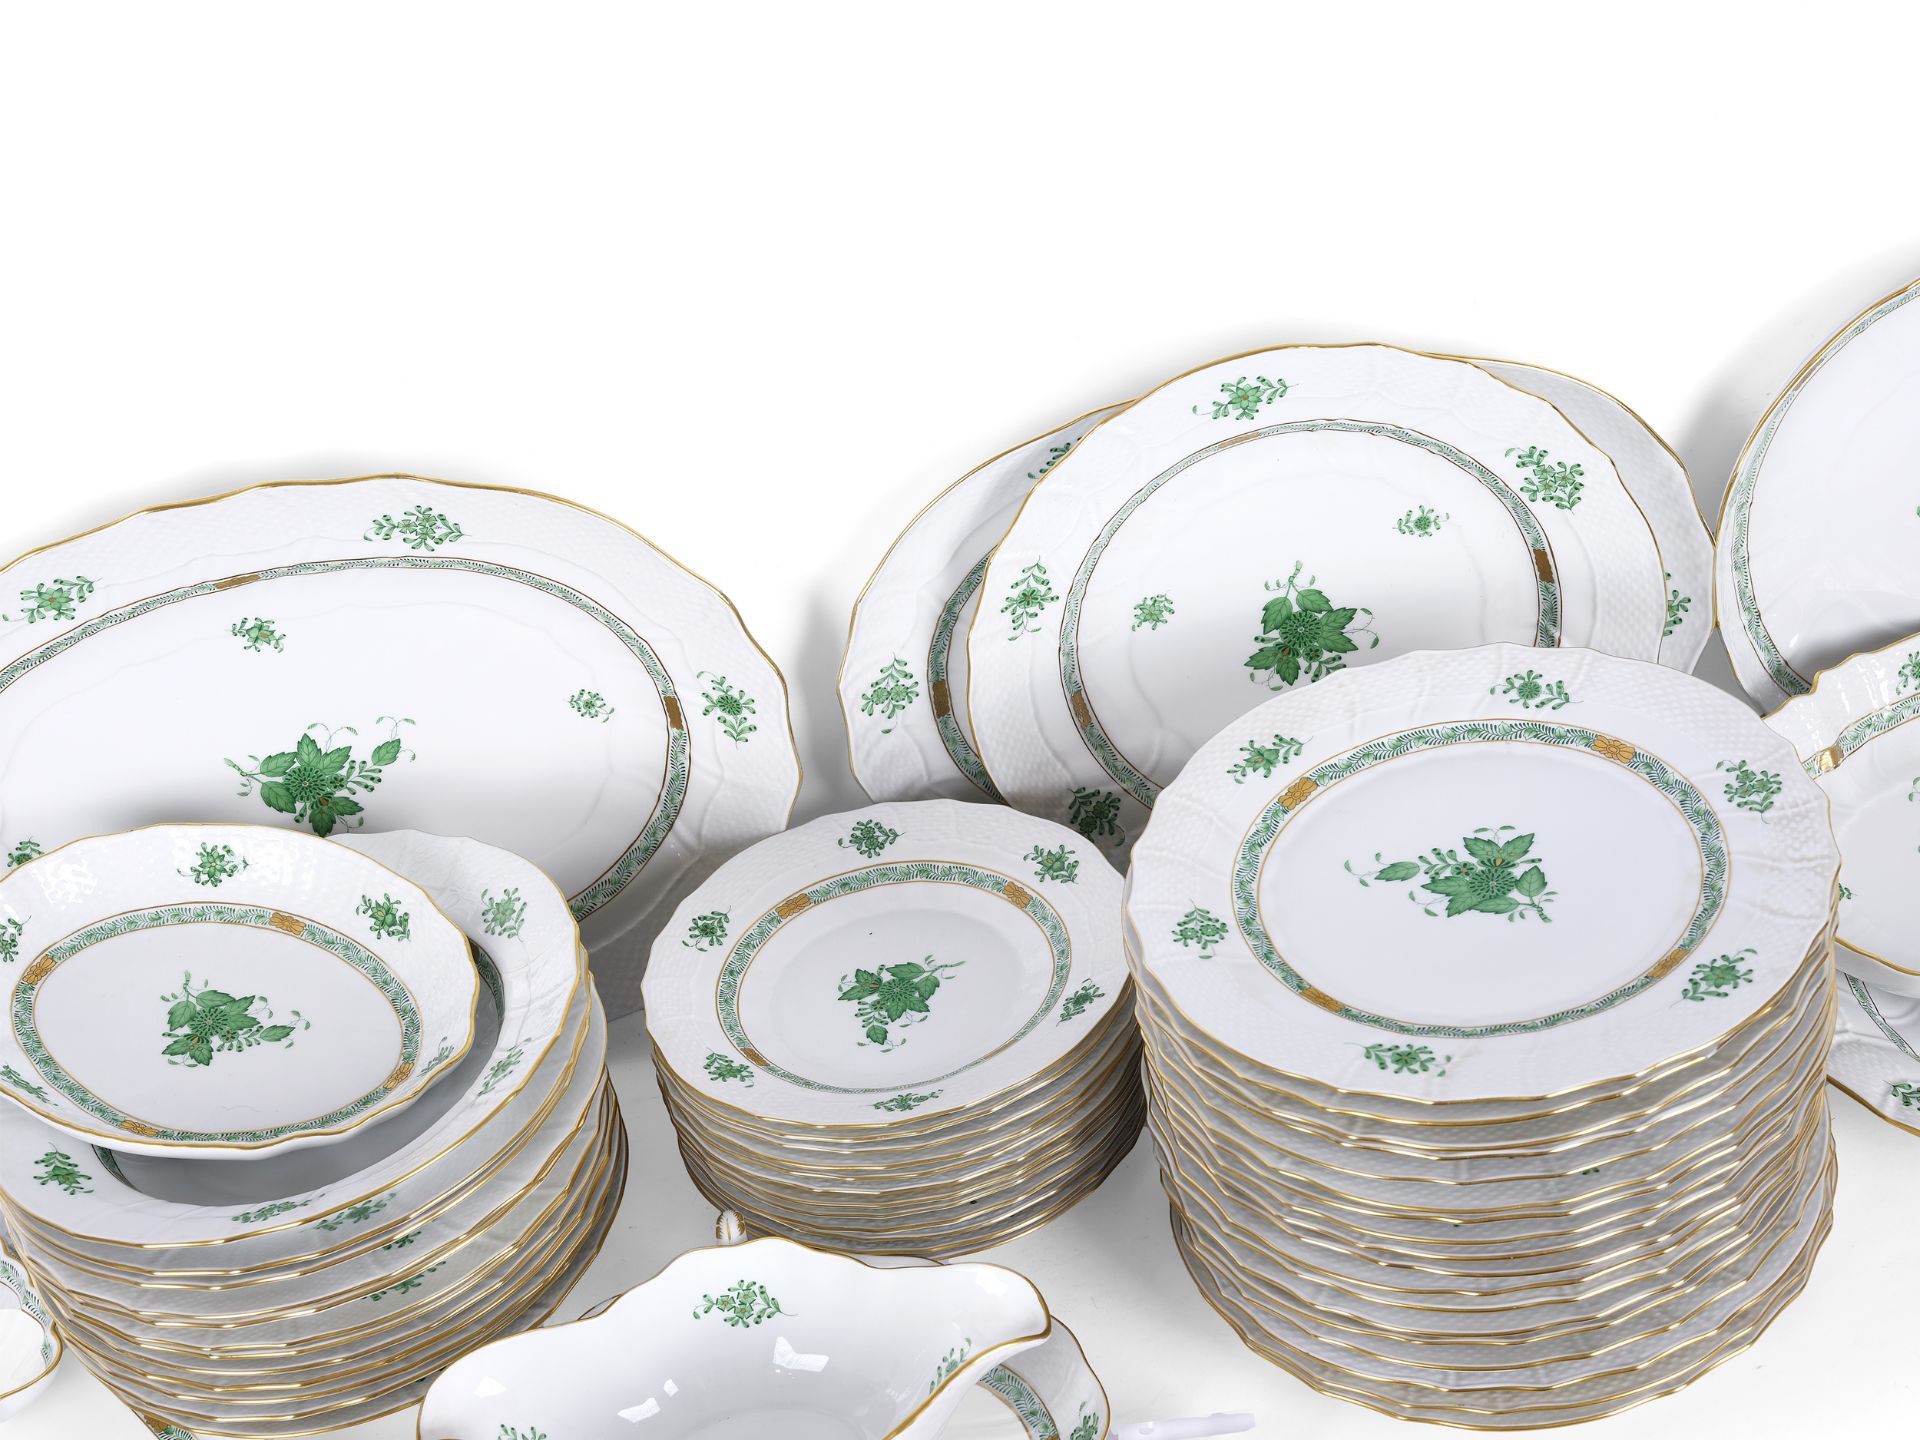 Large dinner service, 53 piece, Herend, Apponyi Vert - Image 2 of 6